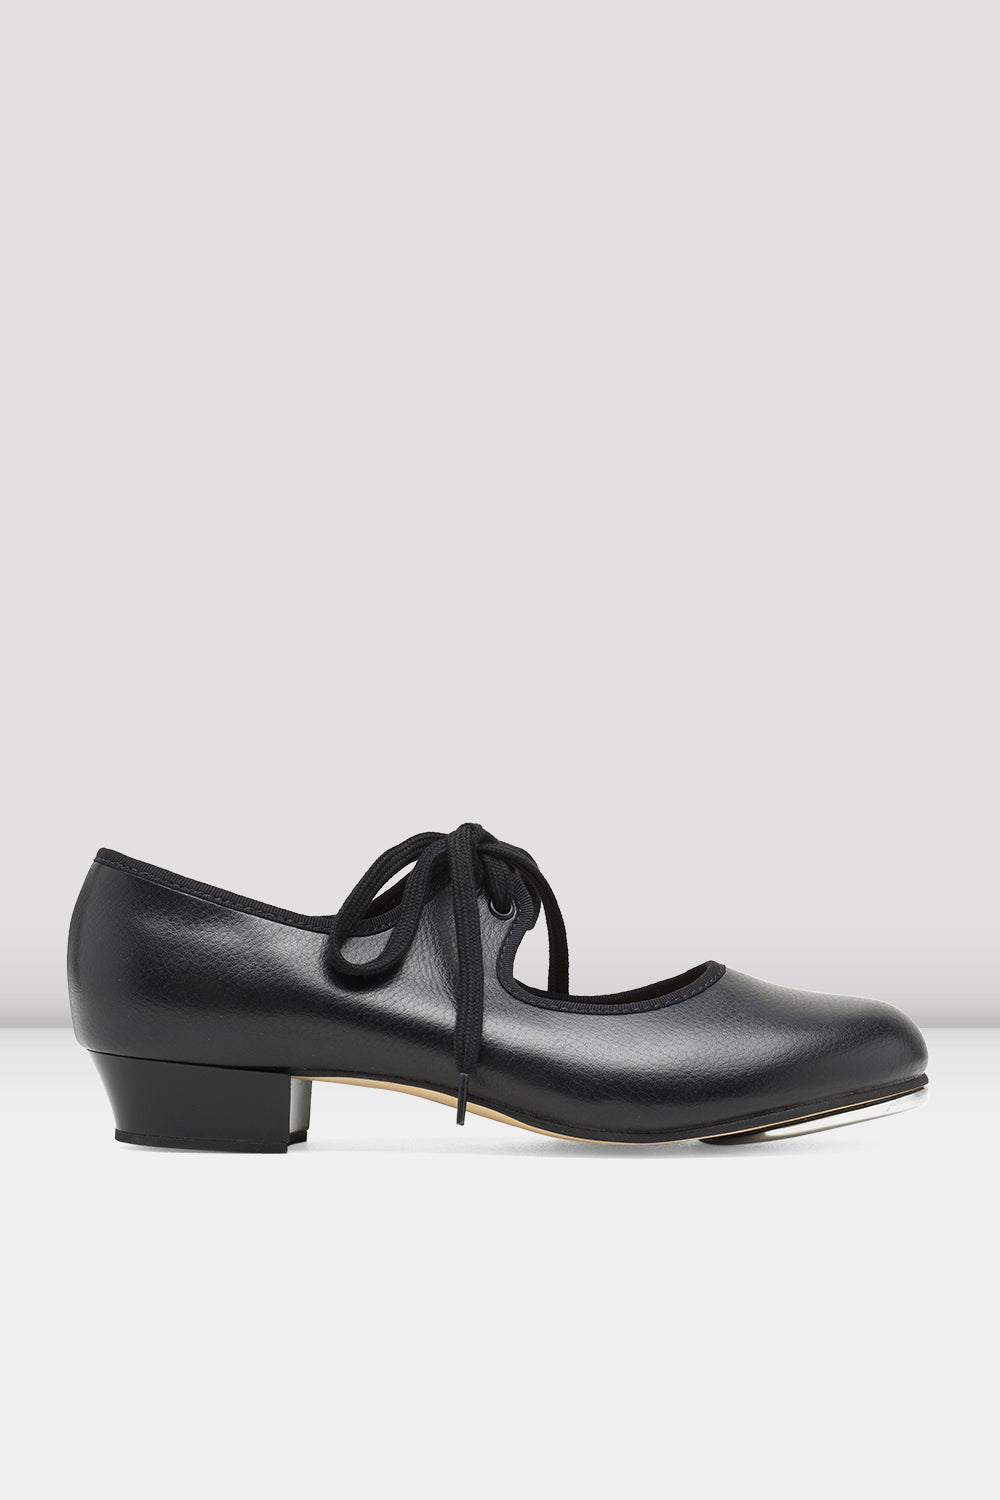 BLOCH Ladies Shirley Tie-Up Tap Shoes, Black Synthetic Leather